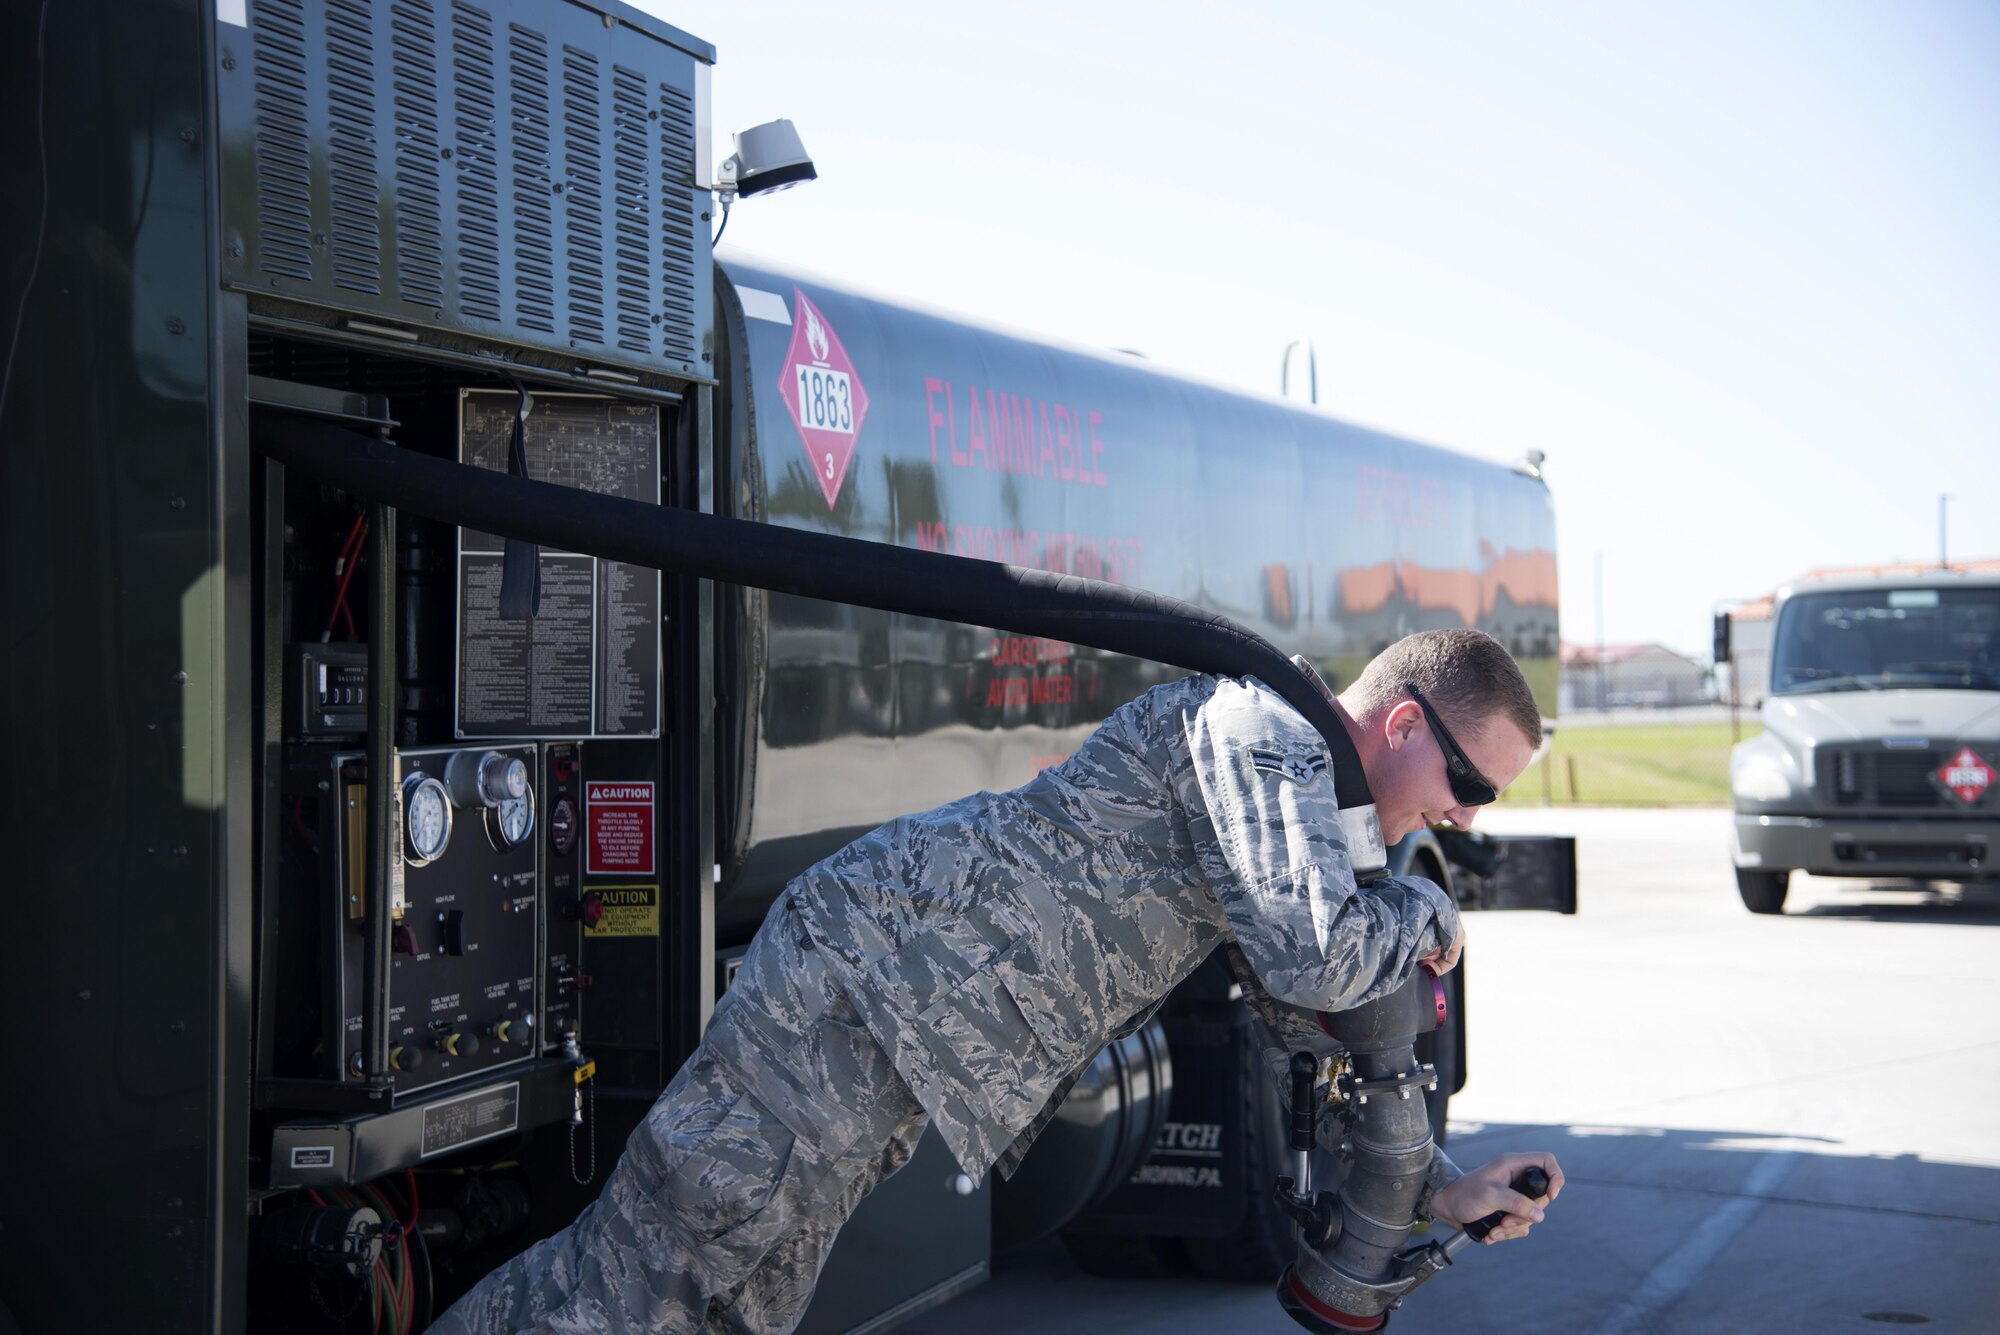 U.S. Air Force Airman 1st Class Ryan Souther, a fuels distribution operator assigned to the 6th Logistics Readiness Squadron, pulls the hose out of a refueling truck at MacDill Air Force Base Fla., Nov. 2, 2017.